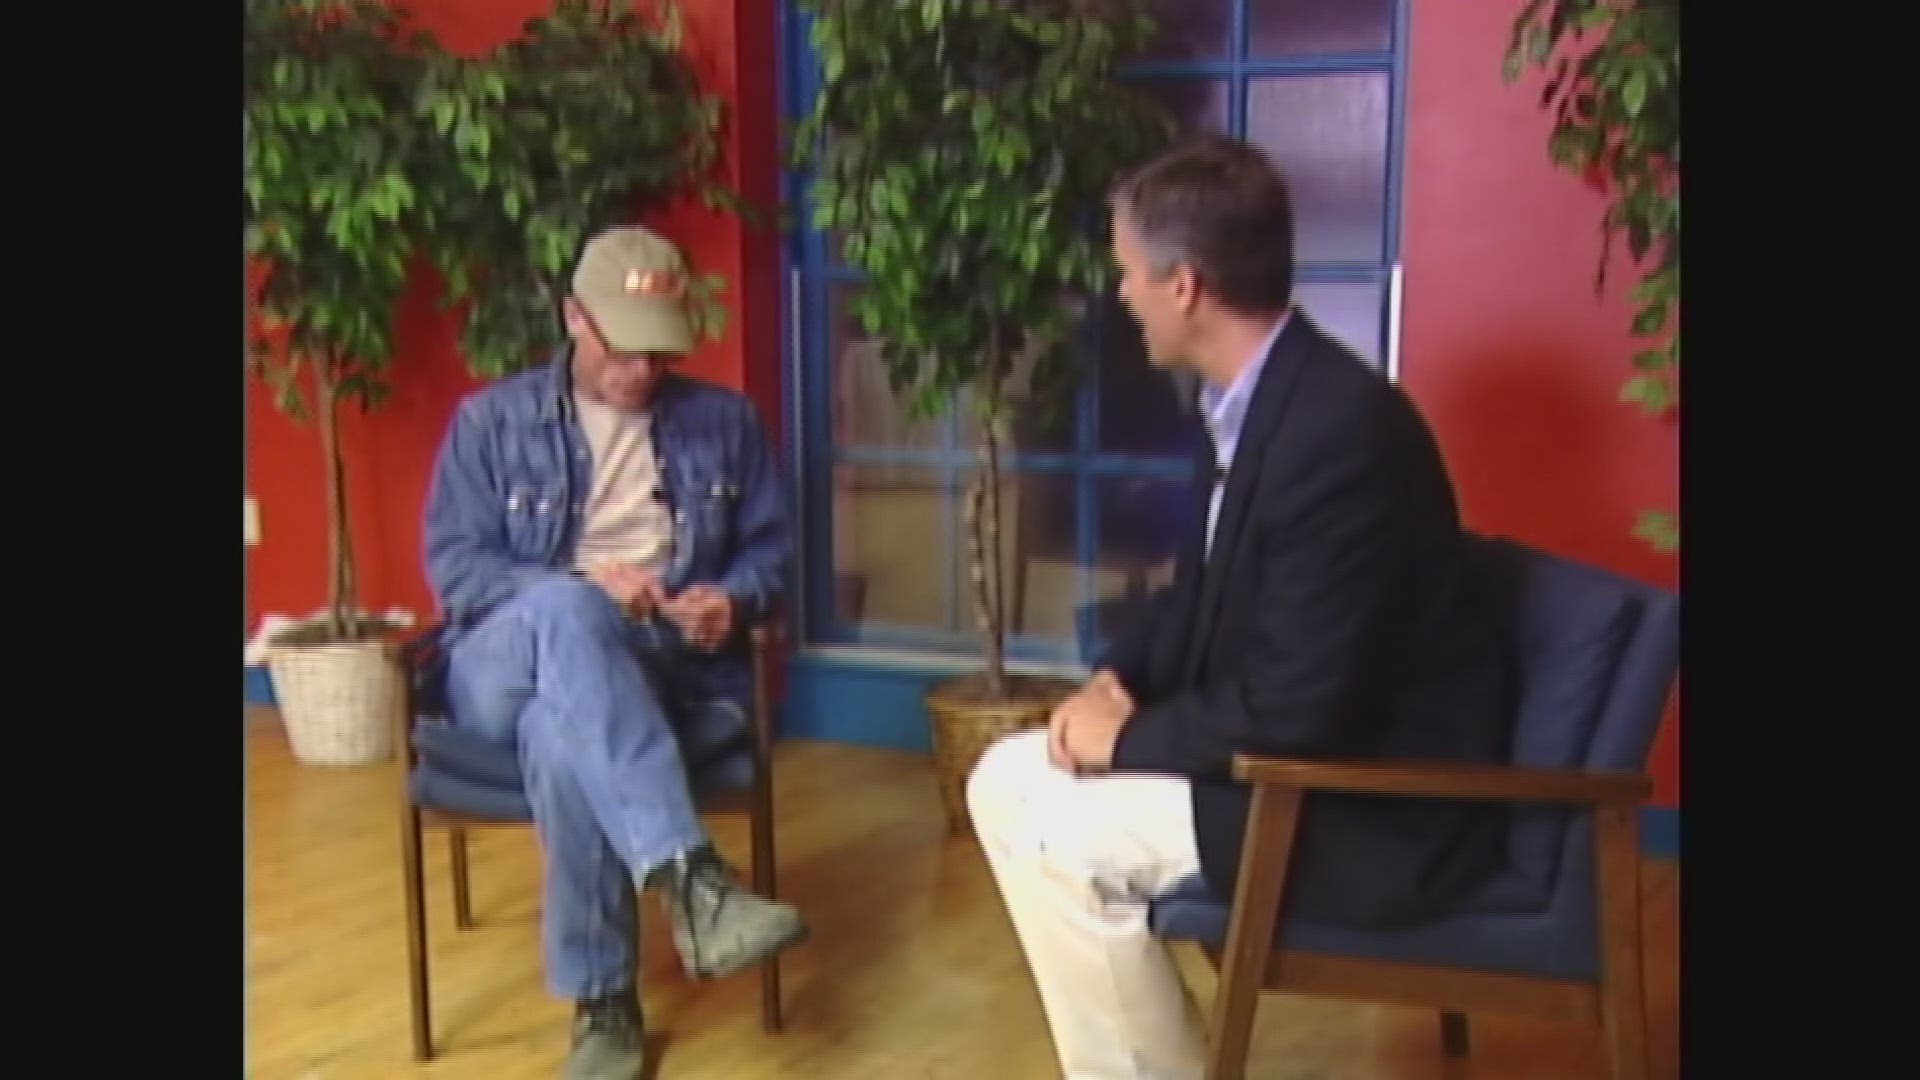 Watch NEWS CENTER Maine's 2003 interview with actor Ed Harris.